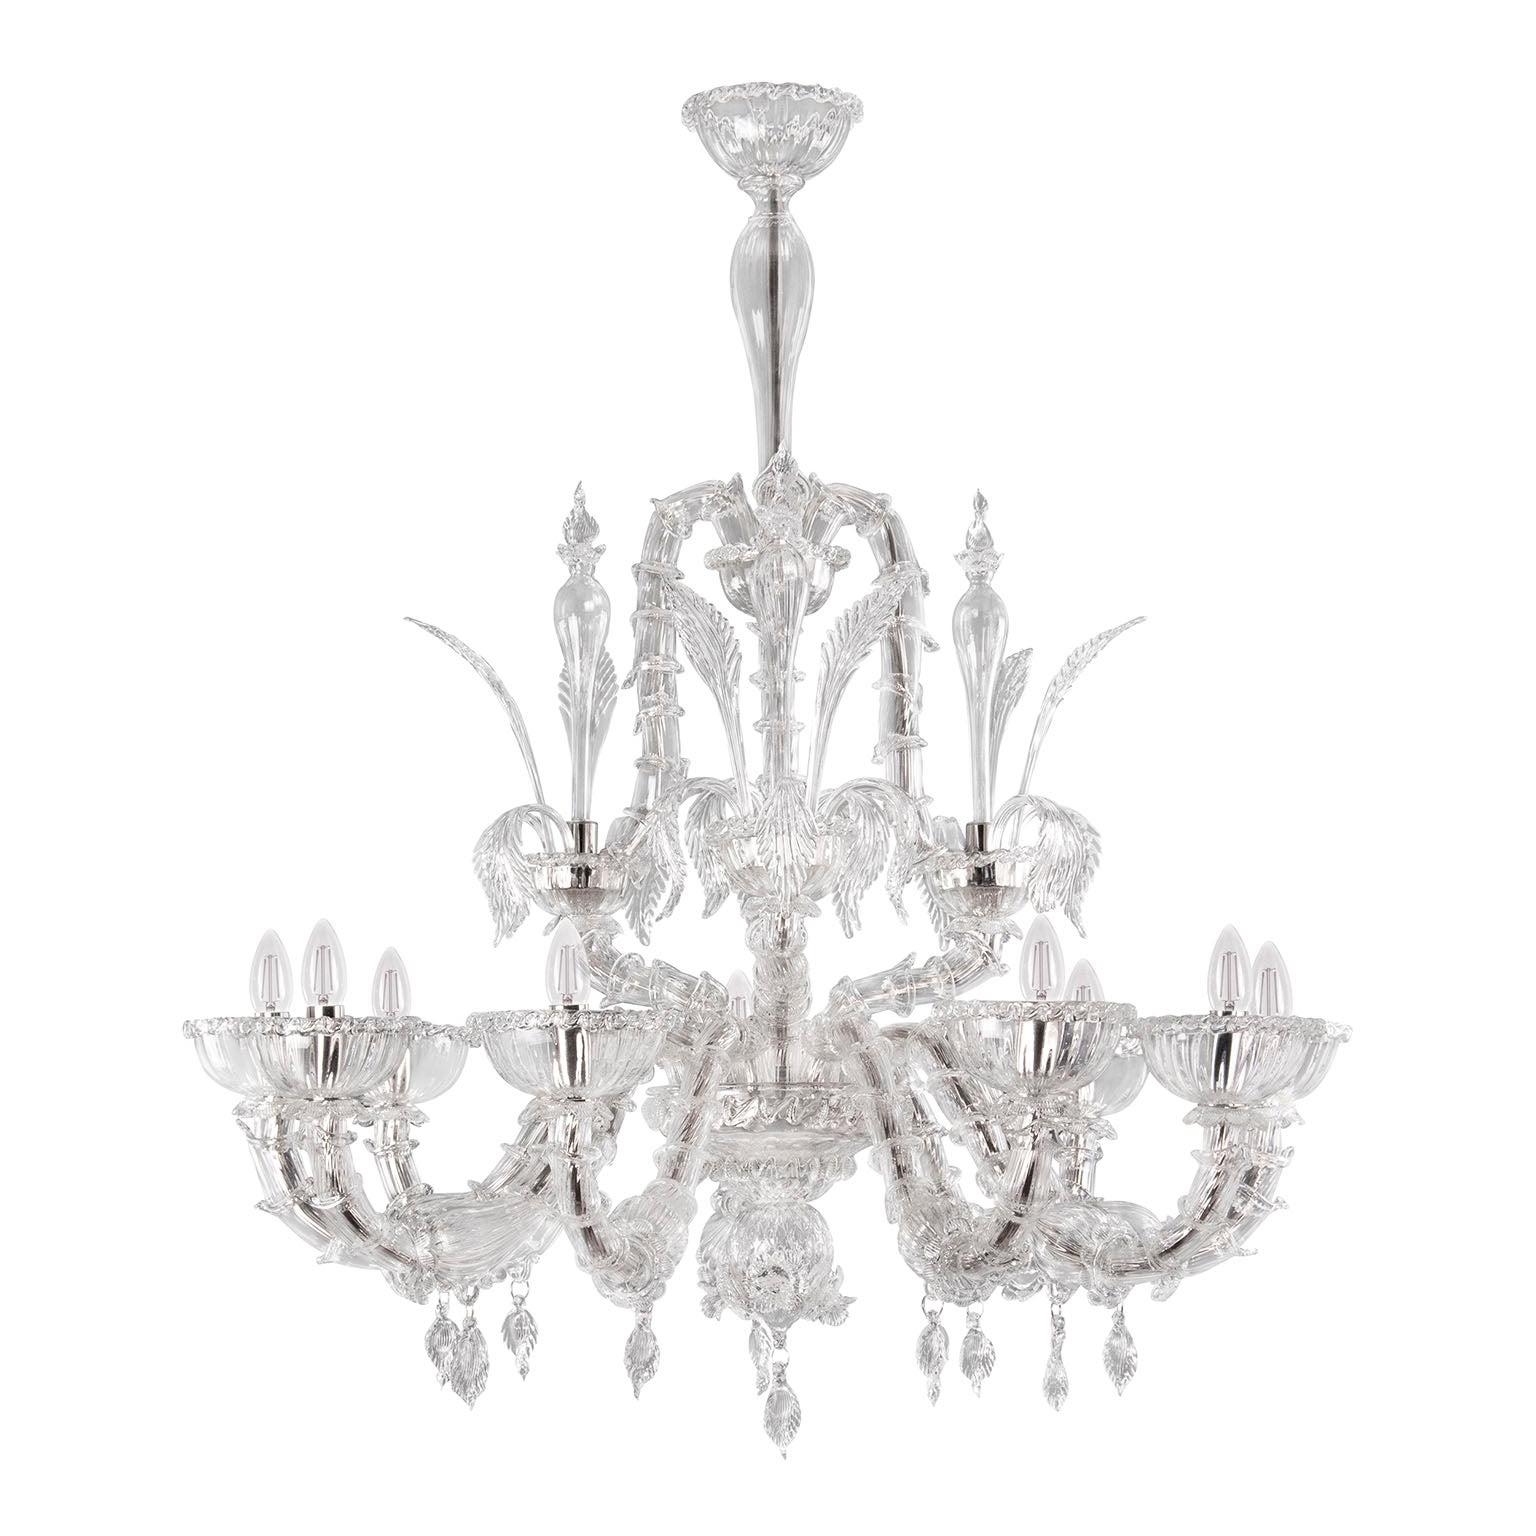 Luxury Rezzonico Chandelier 9 Arms Crystal Glass by Multiforme For Sale